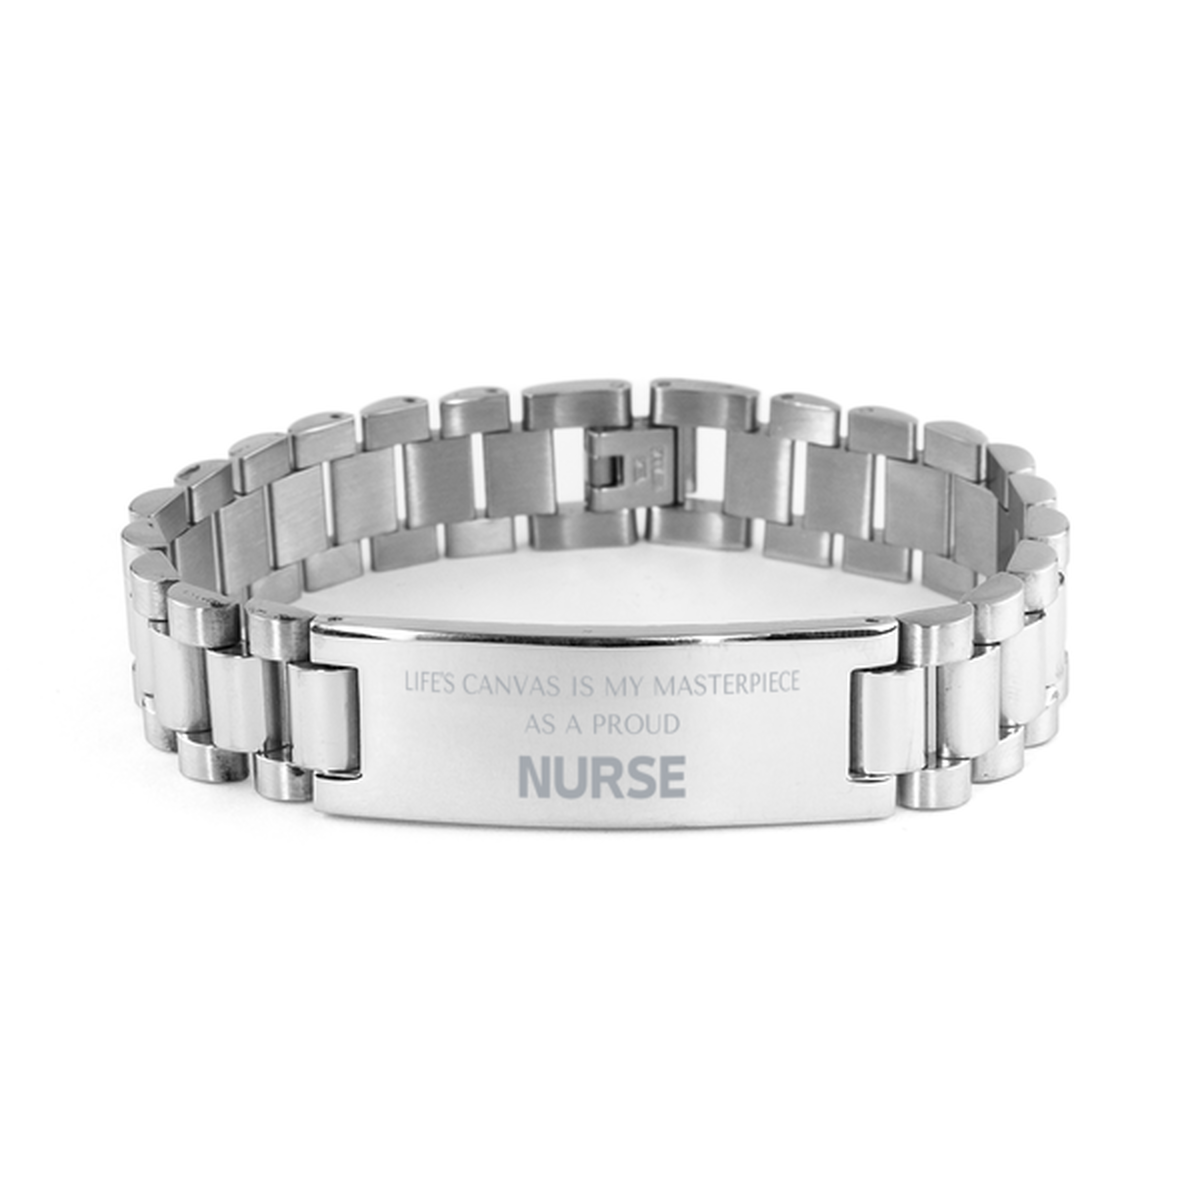 Proud Nurse Gifts, Life's canvas is my masterpiece, Epic Birthday Christmas Unique Ladder Stainless Steel Bracelet For Nurse, Coworkers, Men, Women, Friends